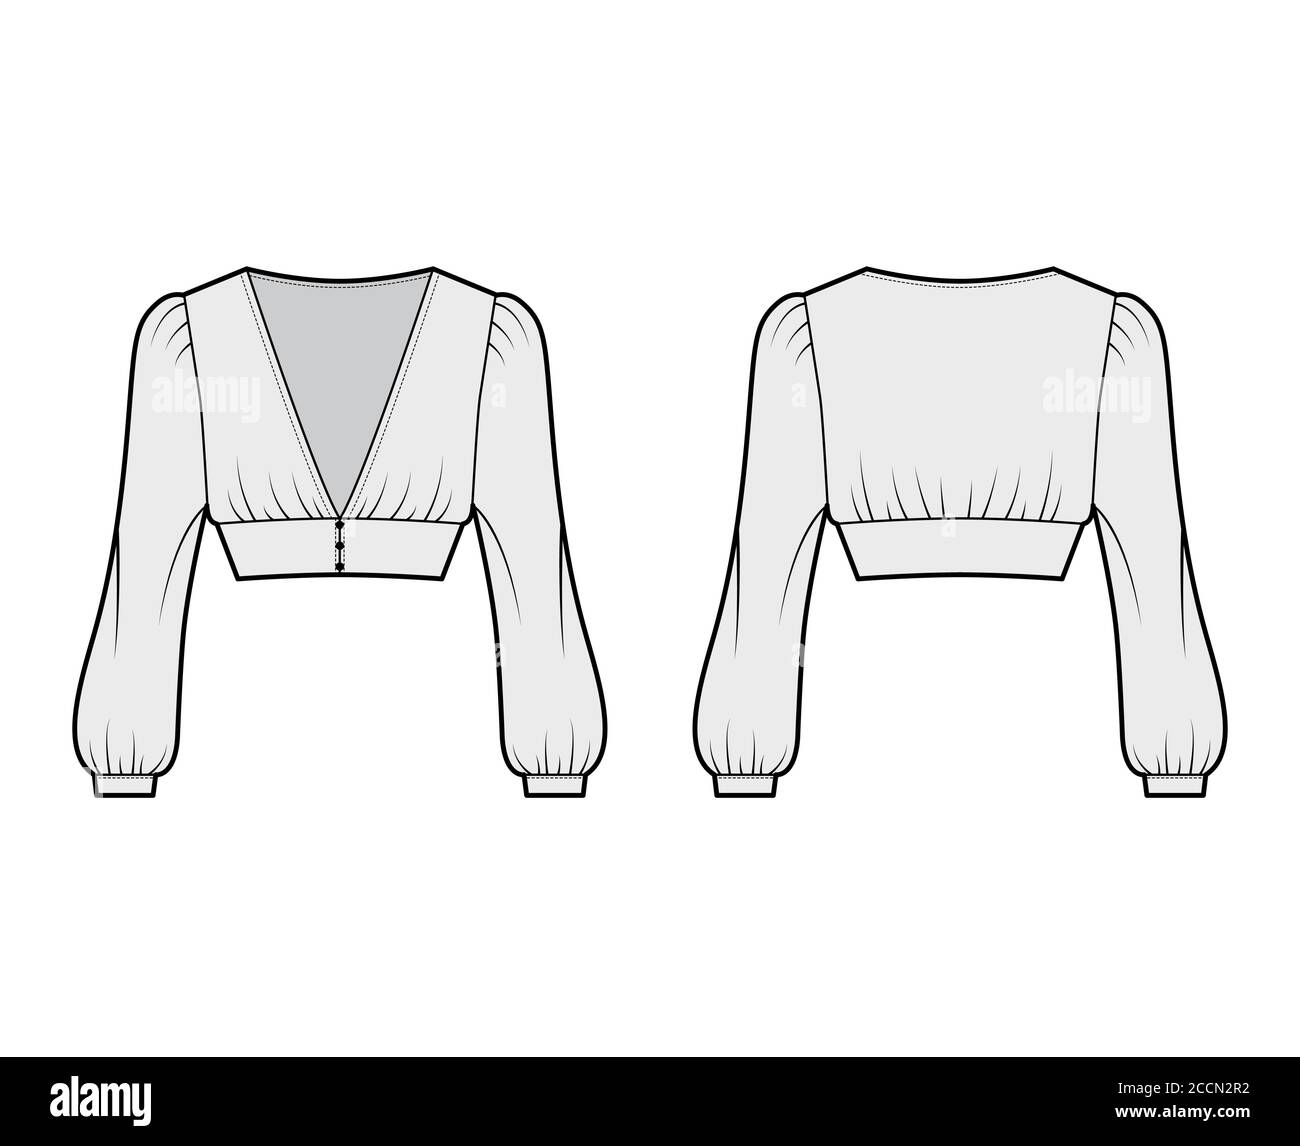 Cropped top technical fashion illustration with long bishop sleeves, puffed shoulders, front button fastenings. Flat apparel shirt template front back, grey color. Women men, unisex blouse CAD mockup Stock Vector